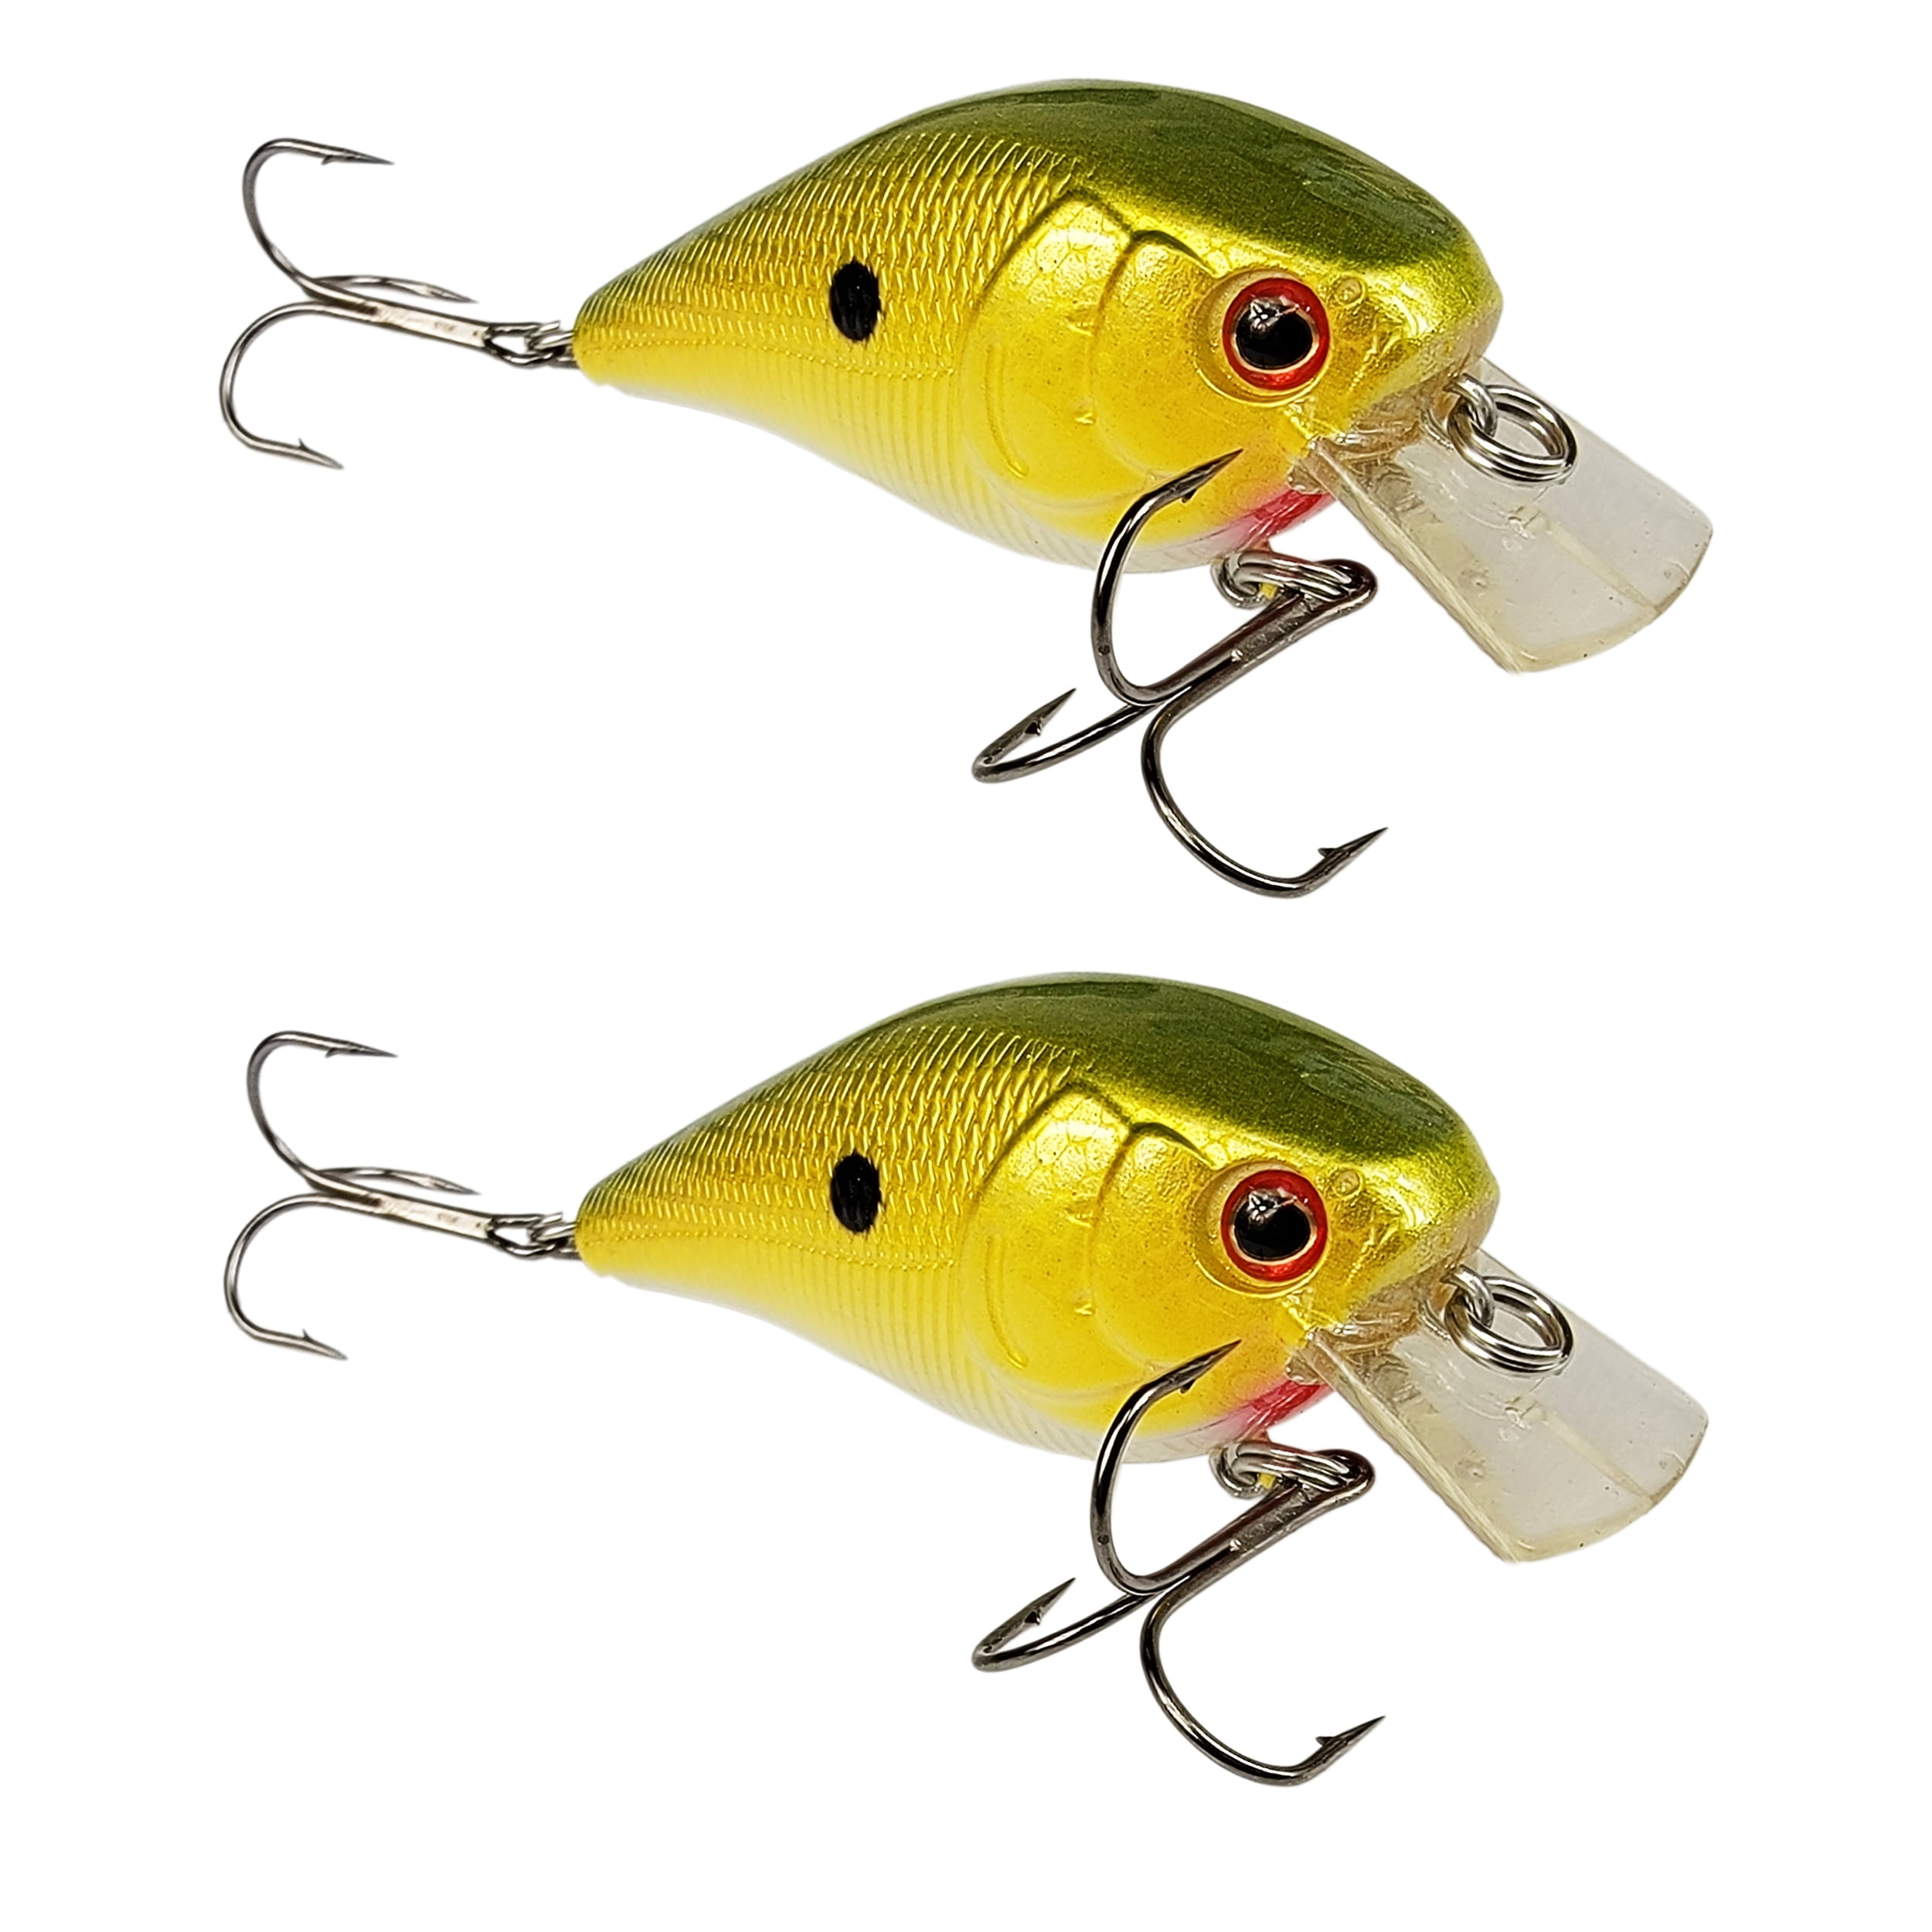 Tackle HD 2-Pack Crankhead Crankbait, Fishing Bait with 9 to 14